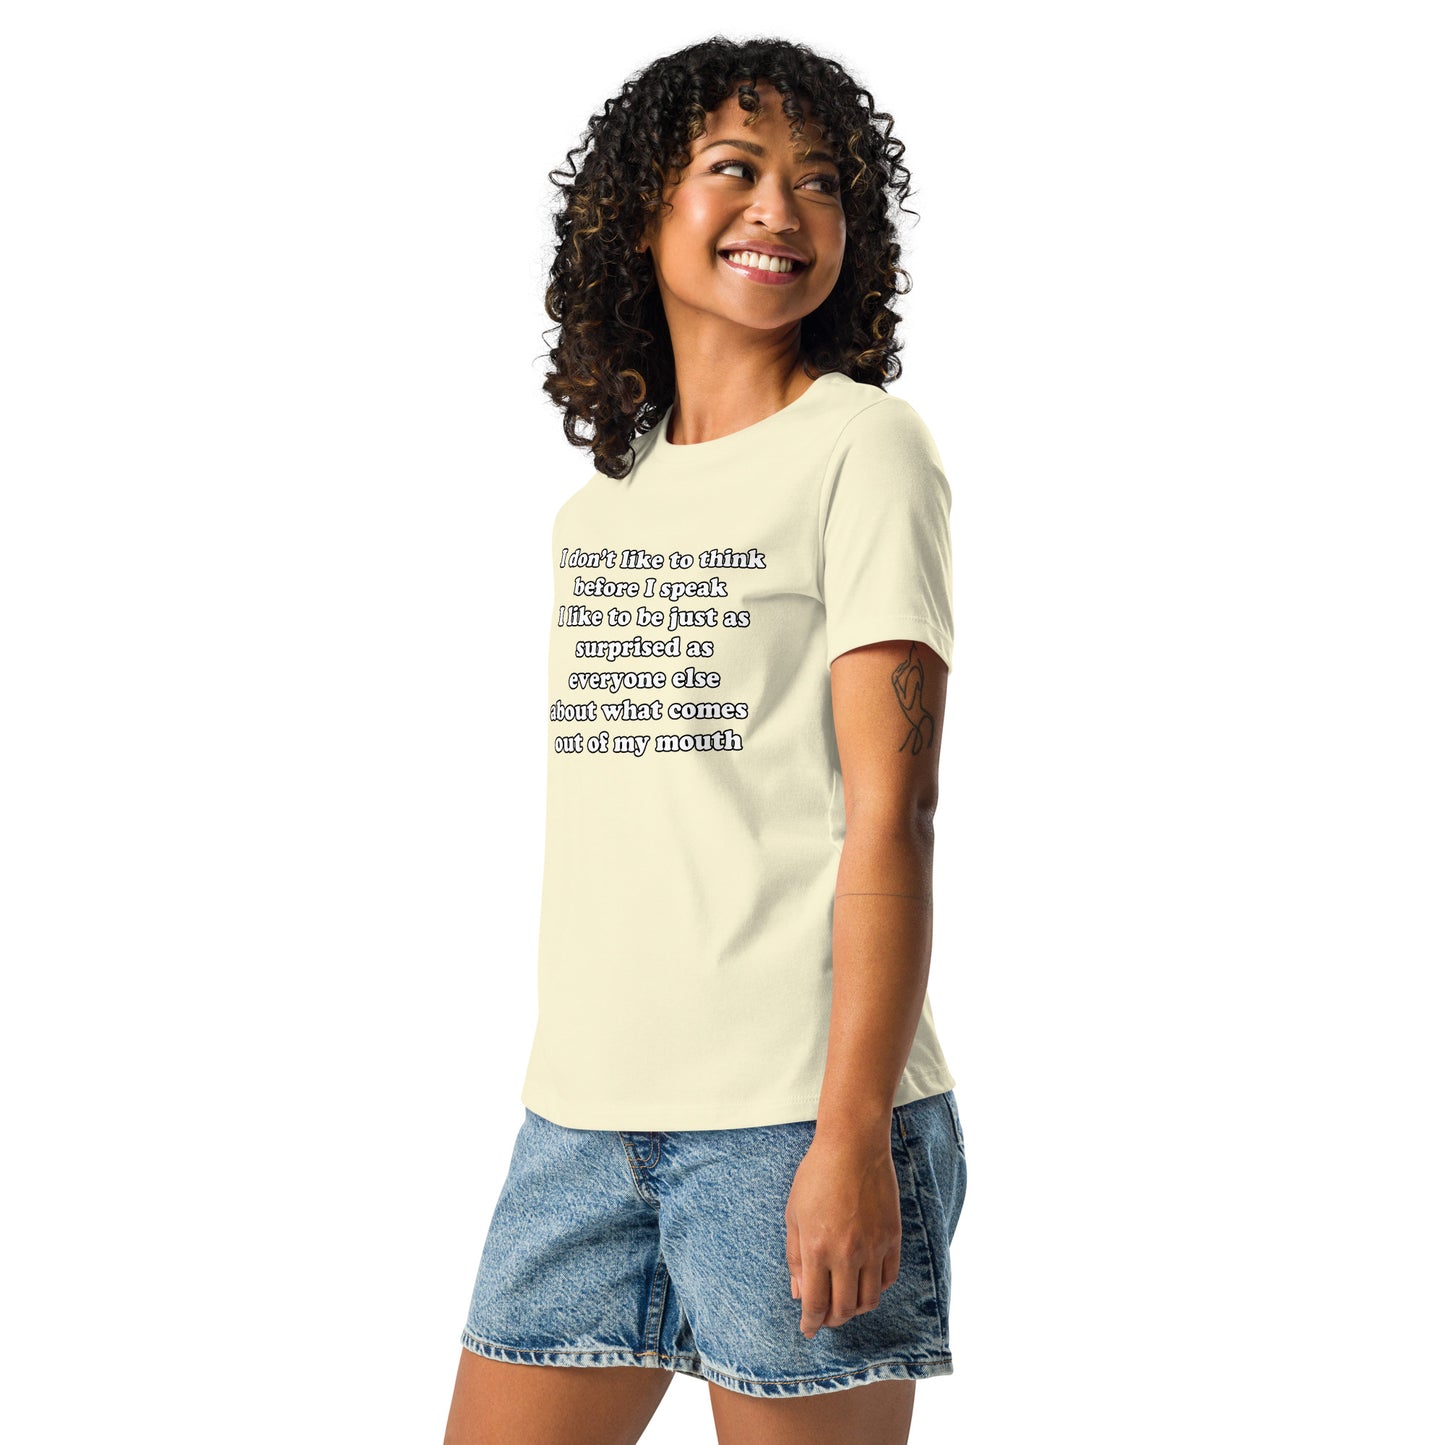 Woman with citron t-shirt with text “I don't think before I speak Just as serprised as everyone about what comes out of my mouth"